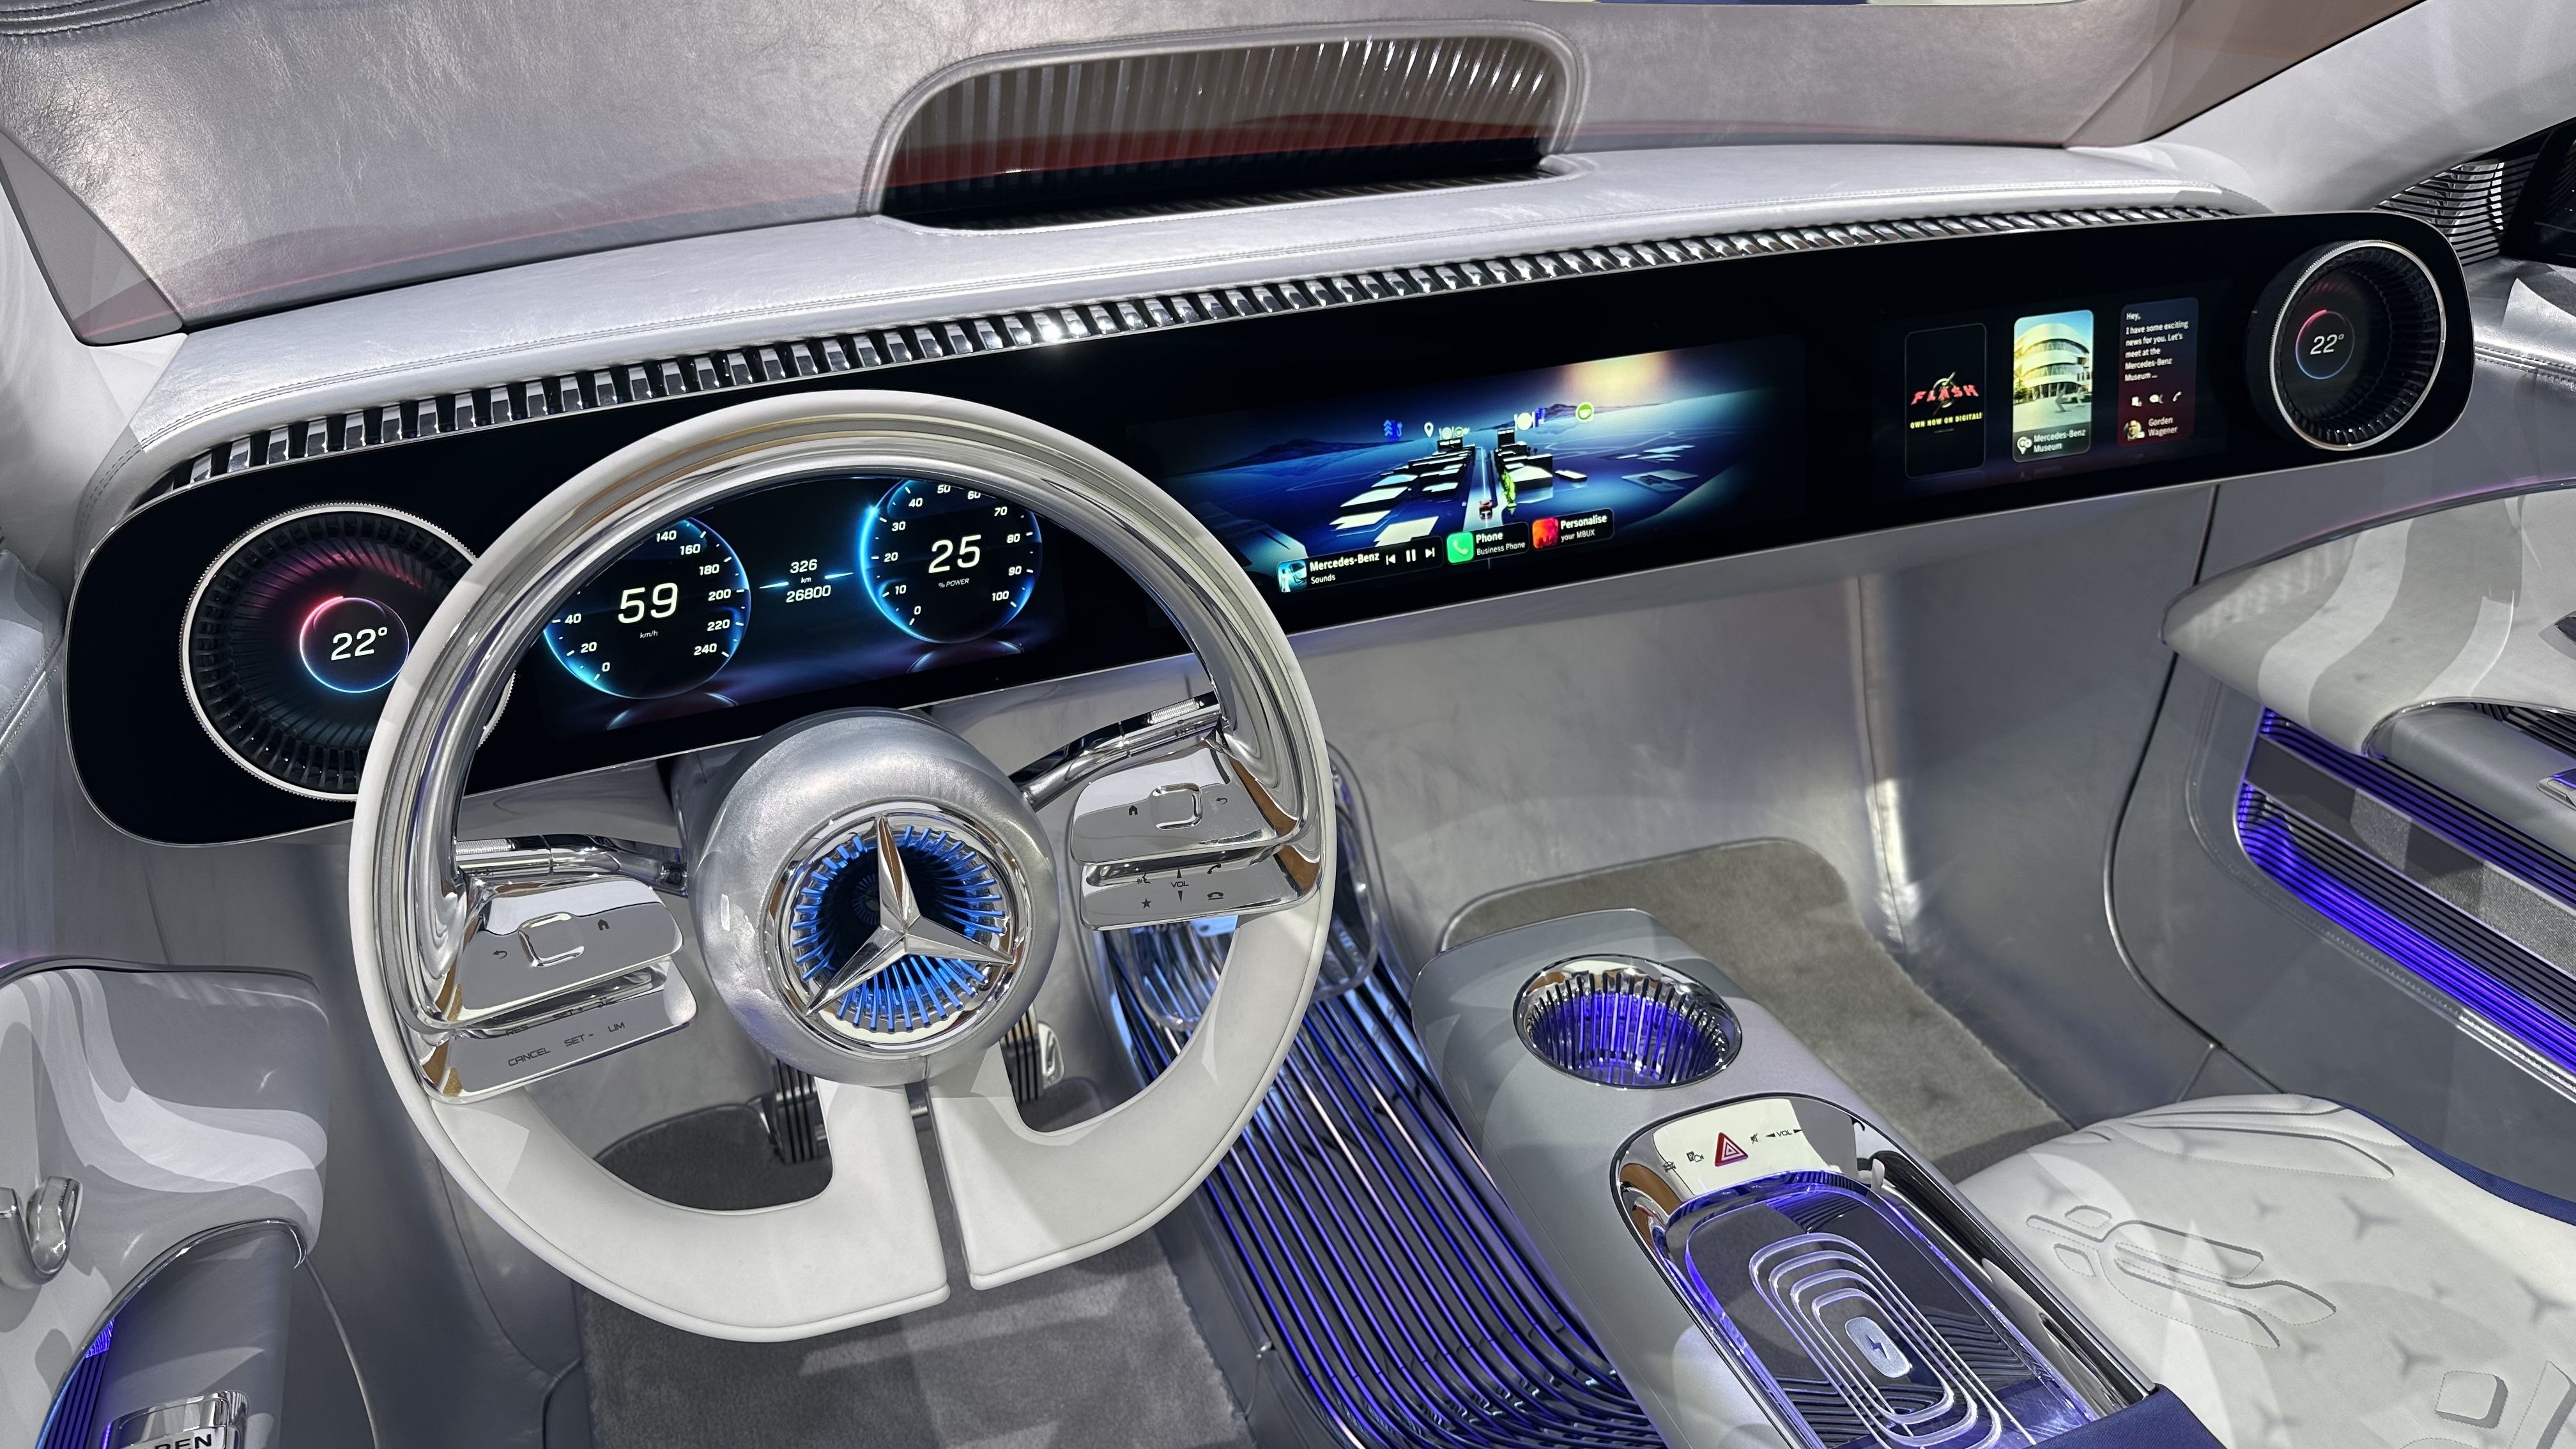 Mercedes CLA Concept unveiled with 750-km range, will rival Tesla Model 3